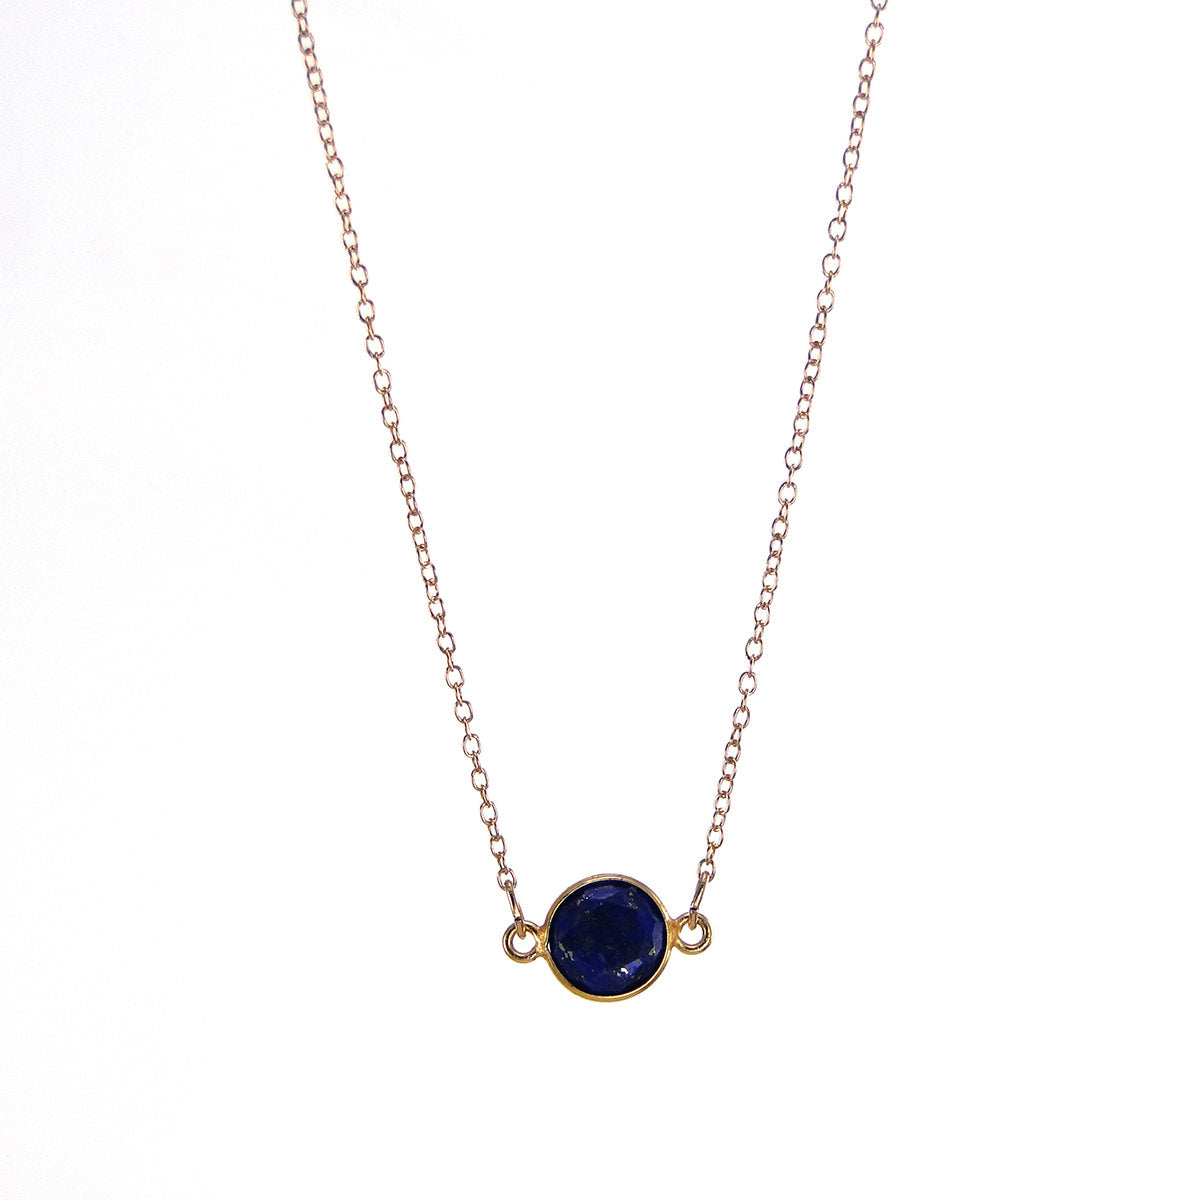 Antique Gold Finish Necklace With Imitation (Sapphire) Blue Stones